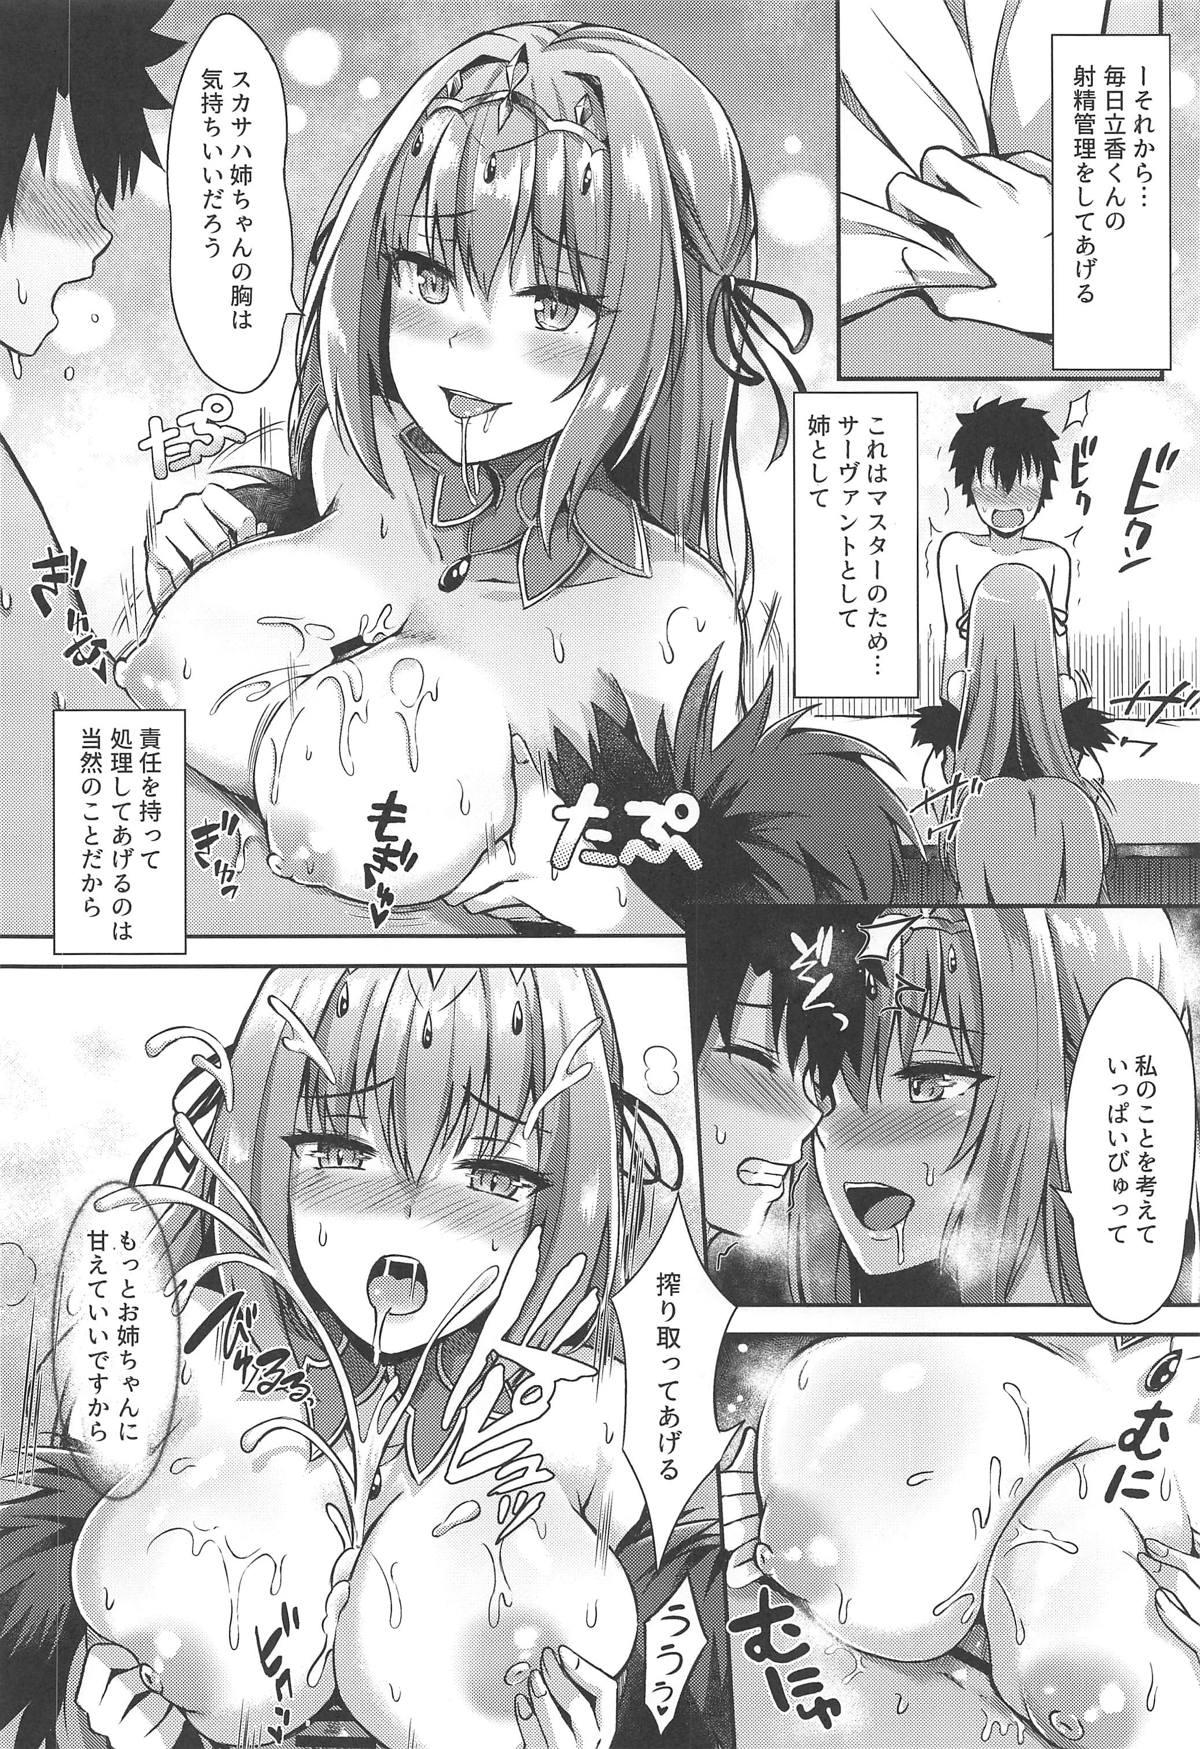 Squirting Scathach Nee-chan ga Kanri Shite Ageyou - Fate grand order Naughty - Page 12